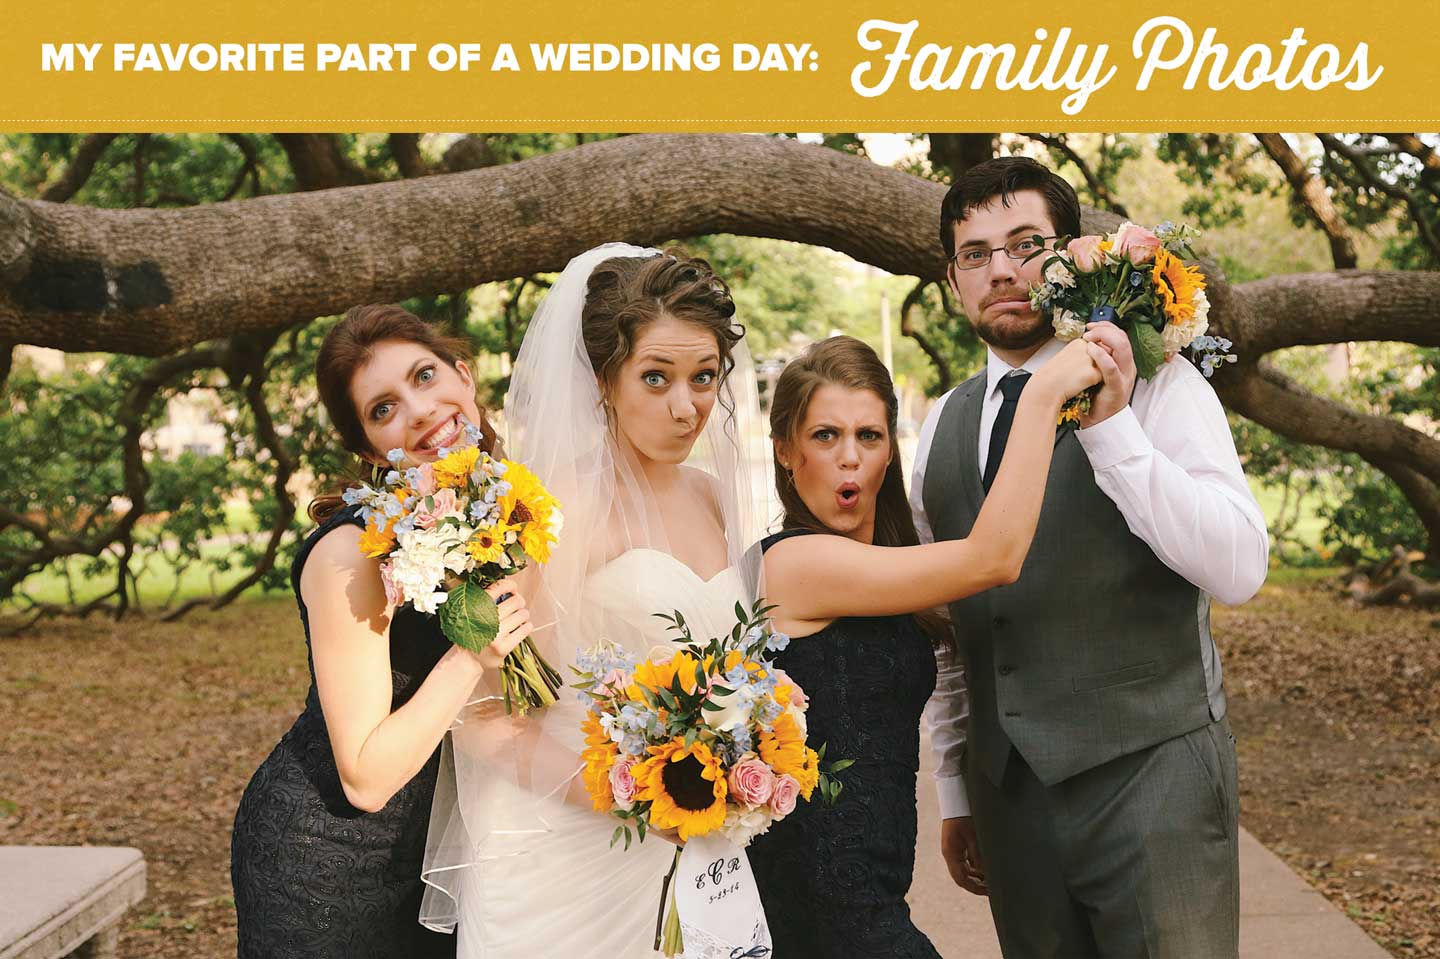 12666My Favorite Part Of A Wedding Day: Family Photos